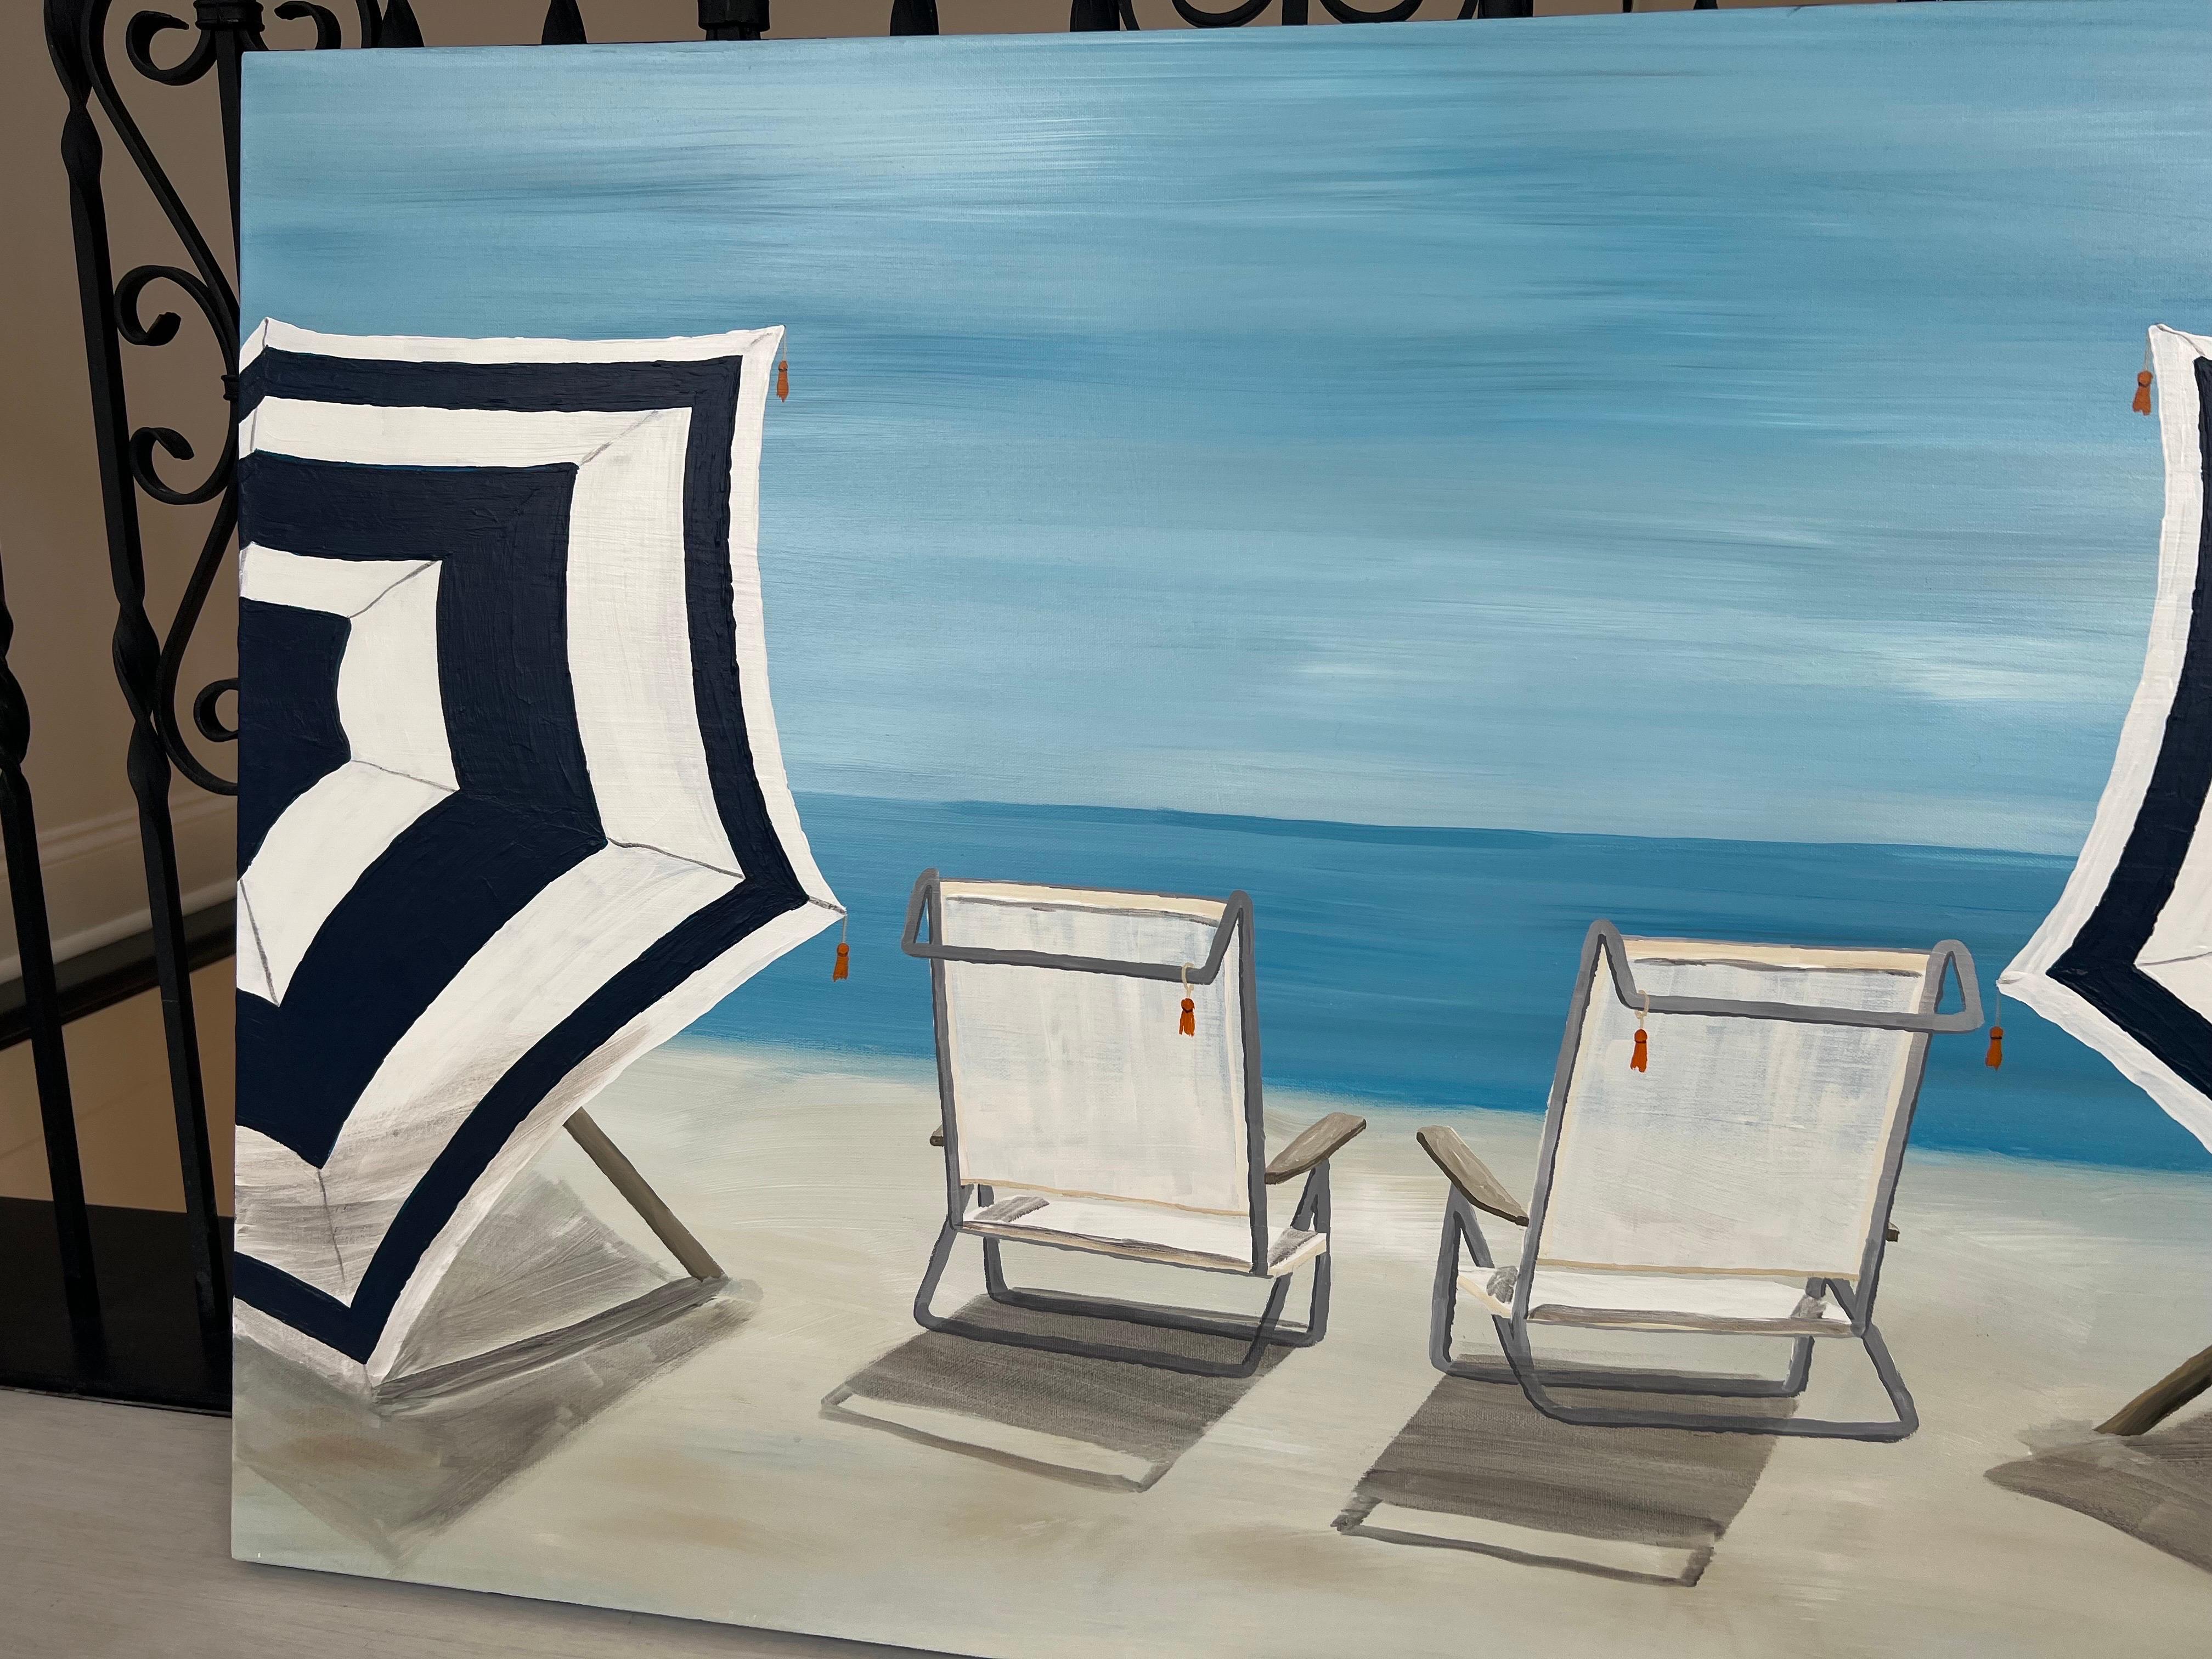 Beach Time by Susan Kinsella, Beach chairs in blue Acrylic on Canvas Painting 1